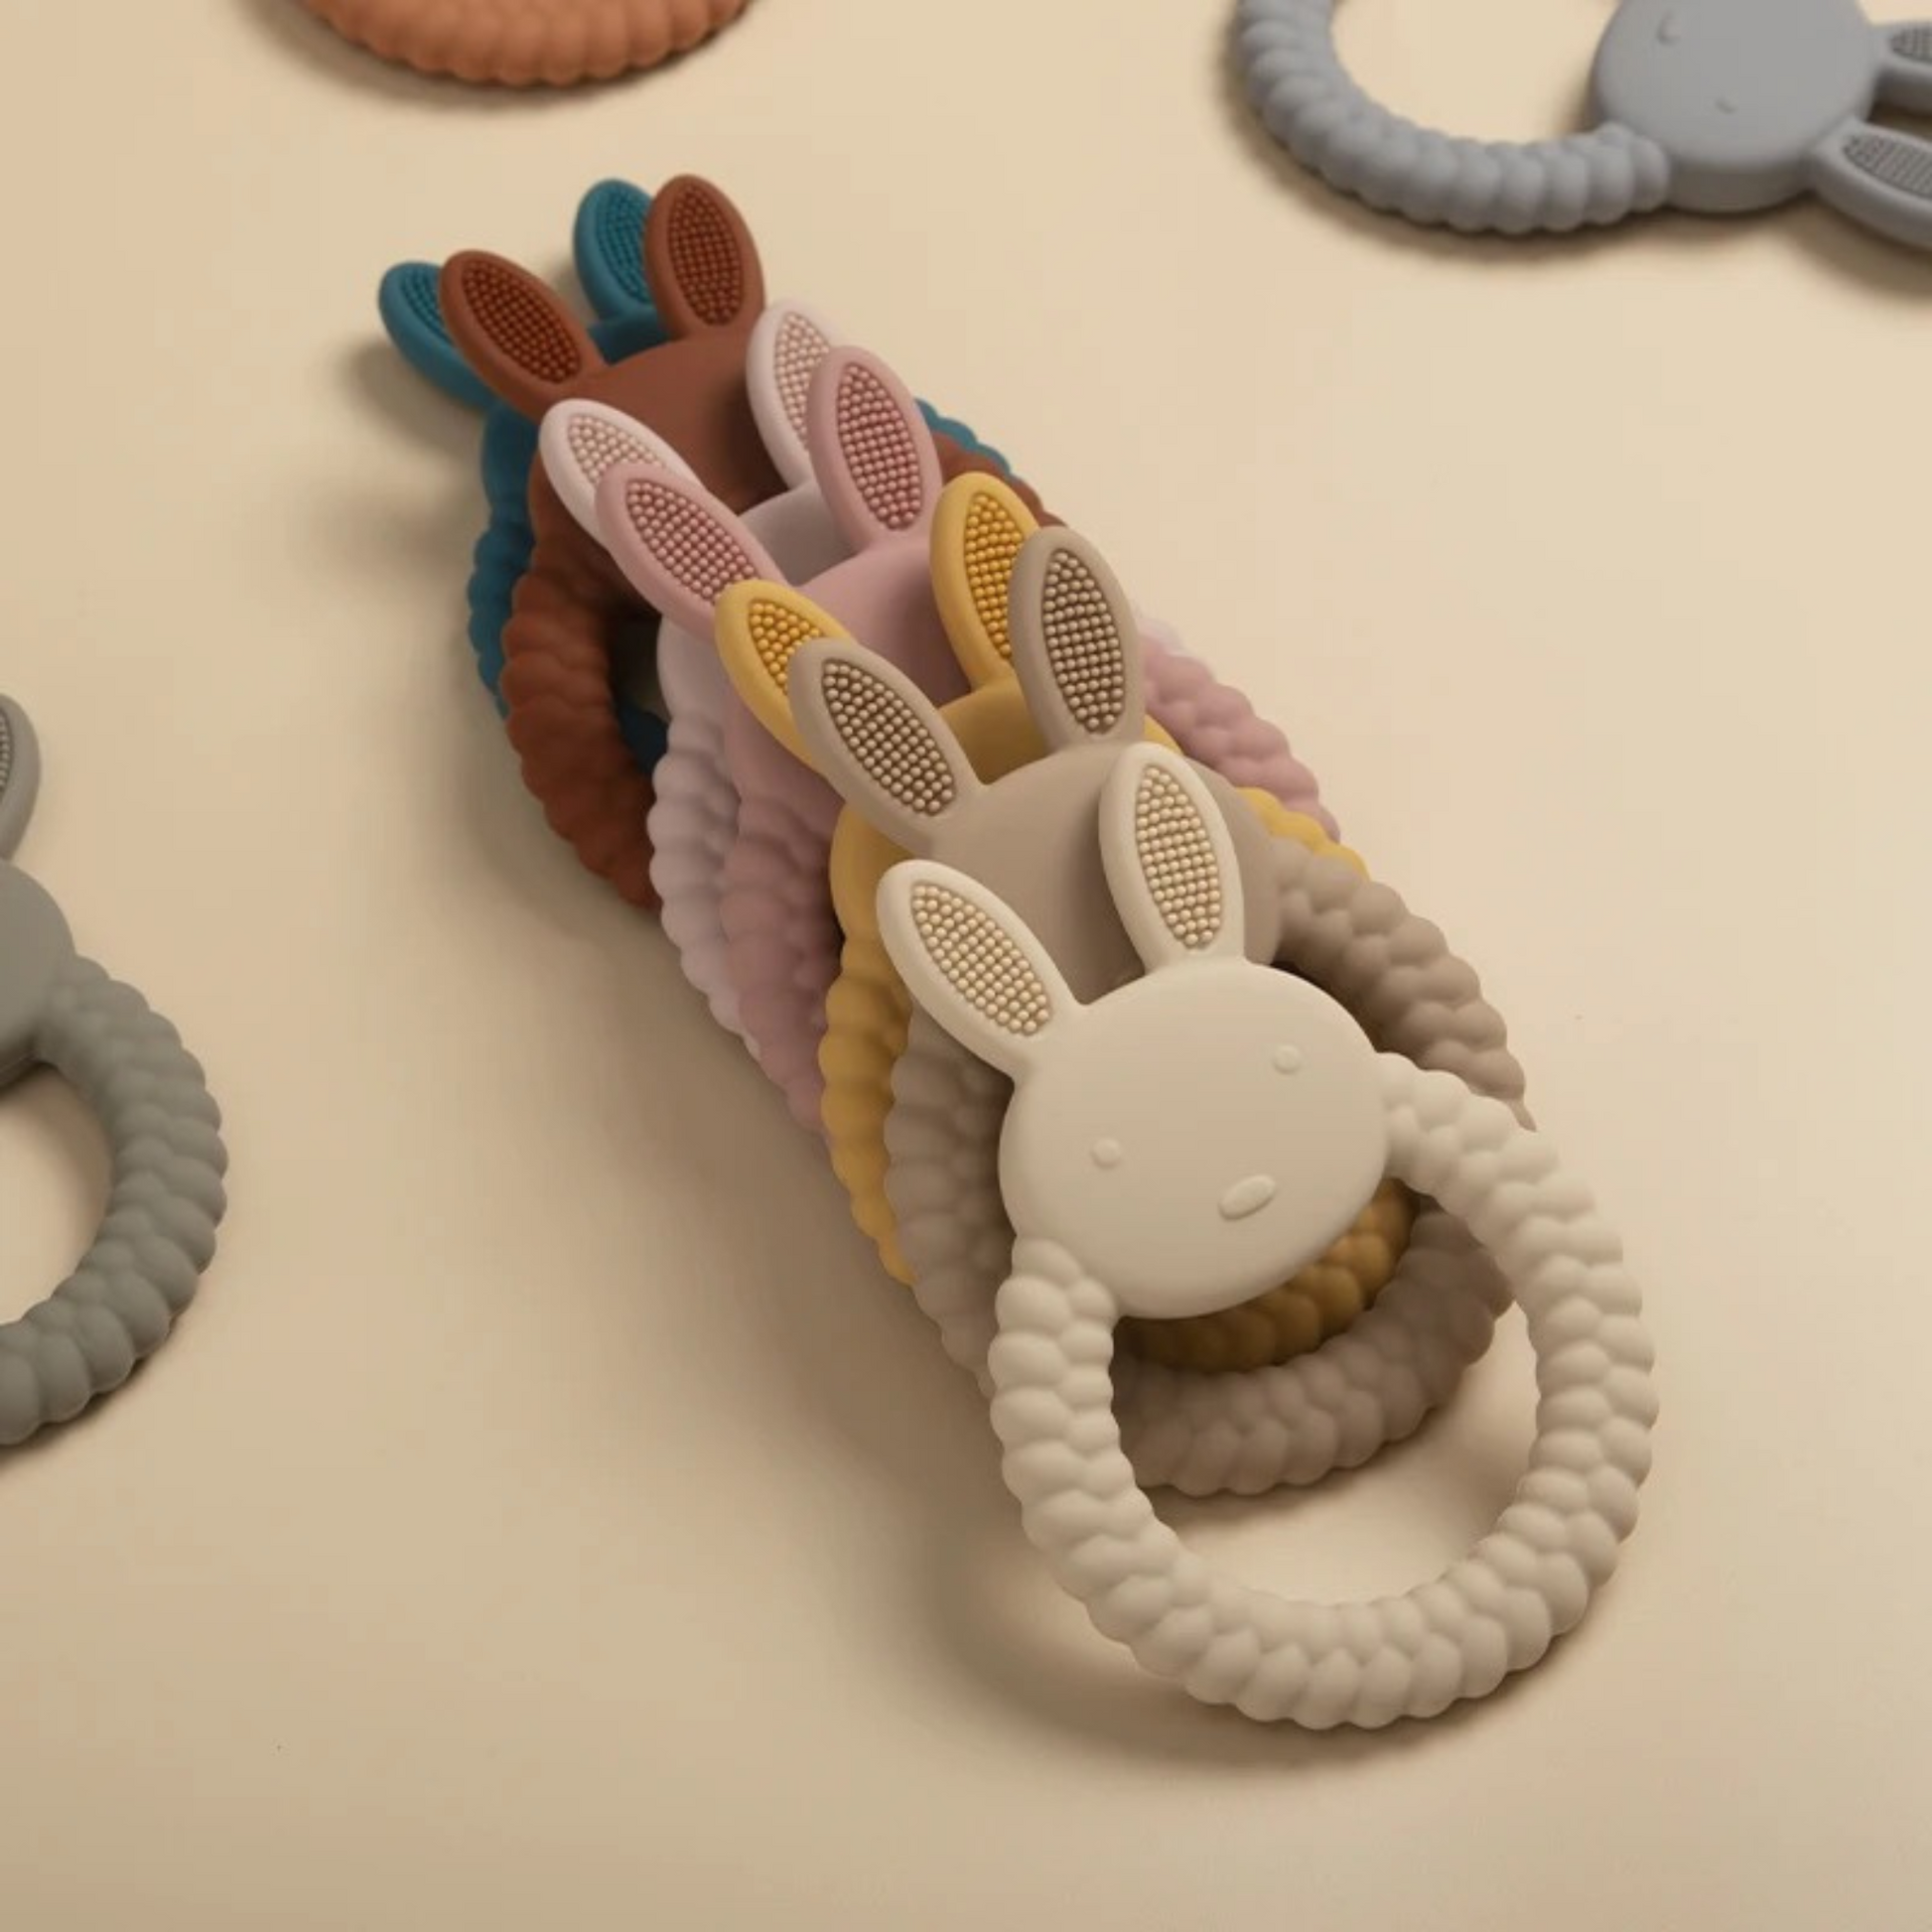 Rabbit Silicone Teether Ring